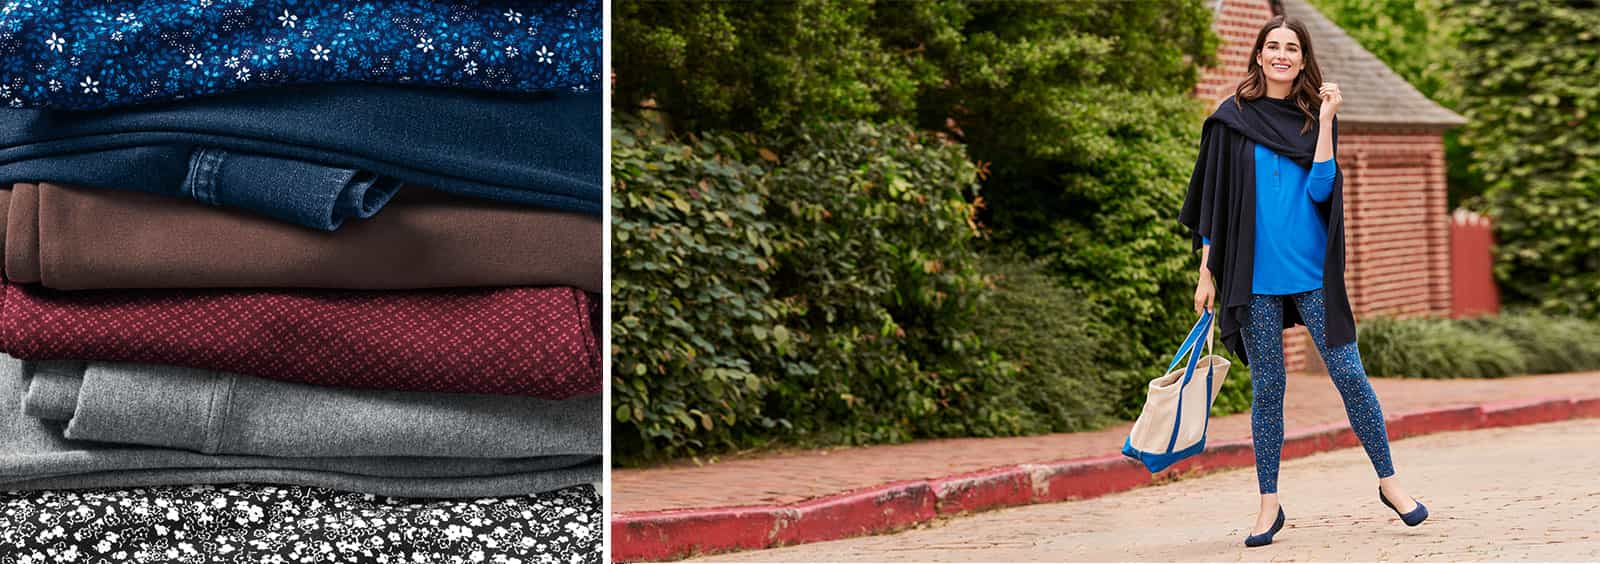 Your Legging Questions Answered